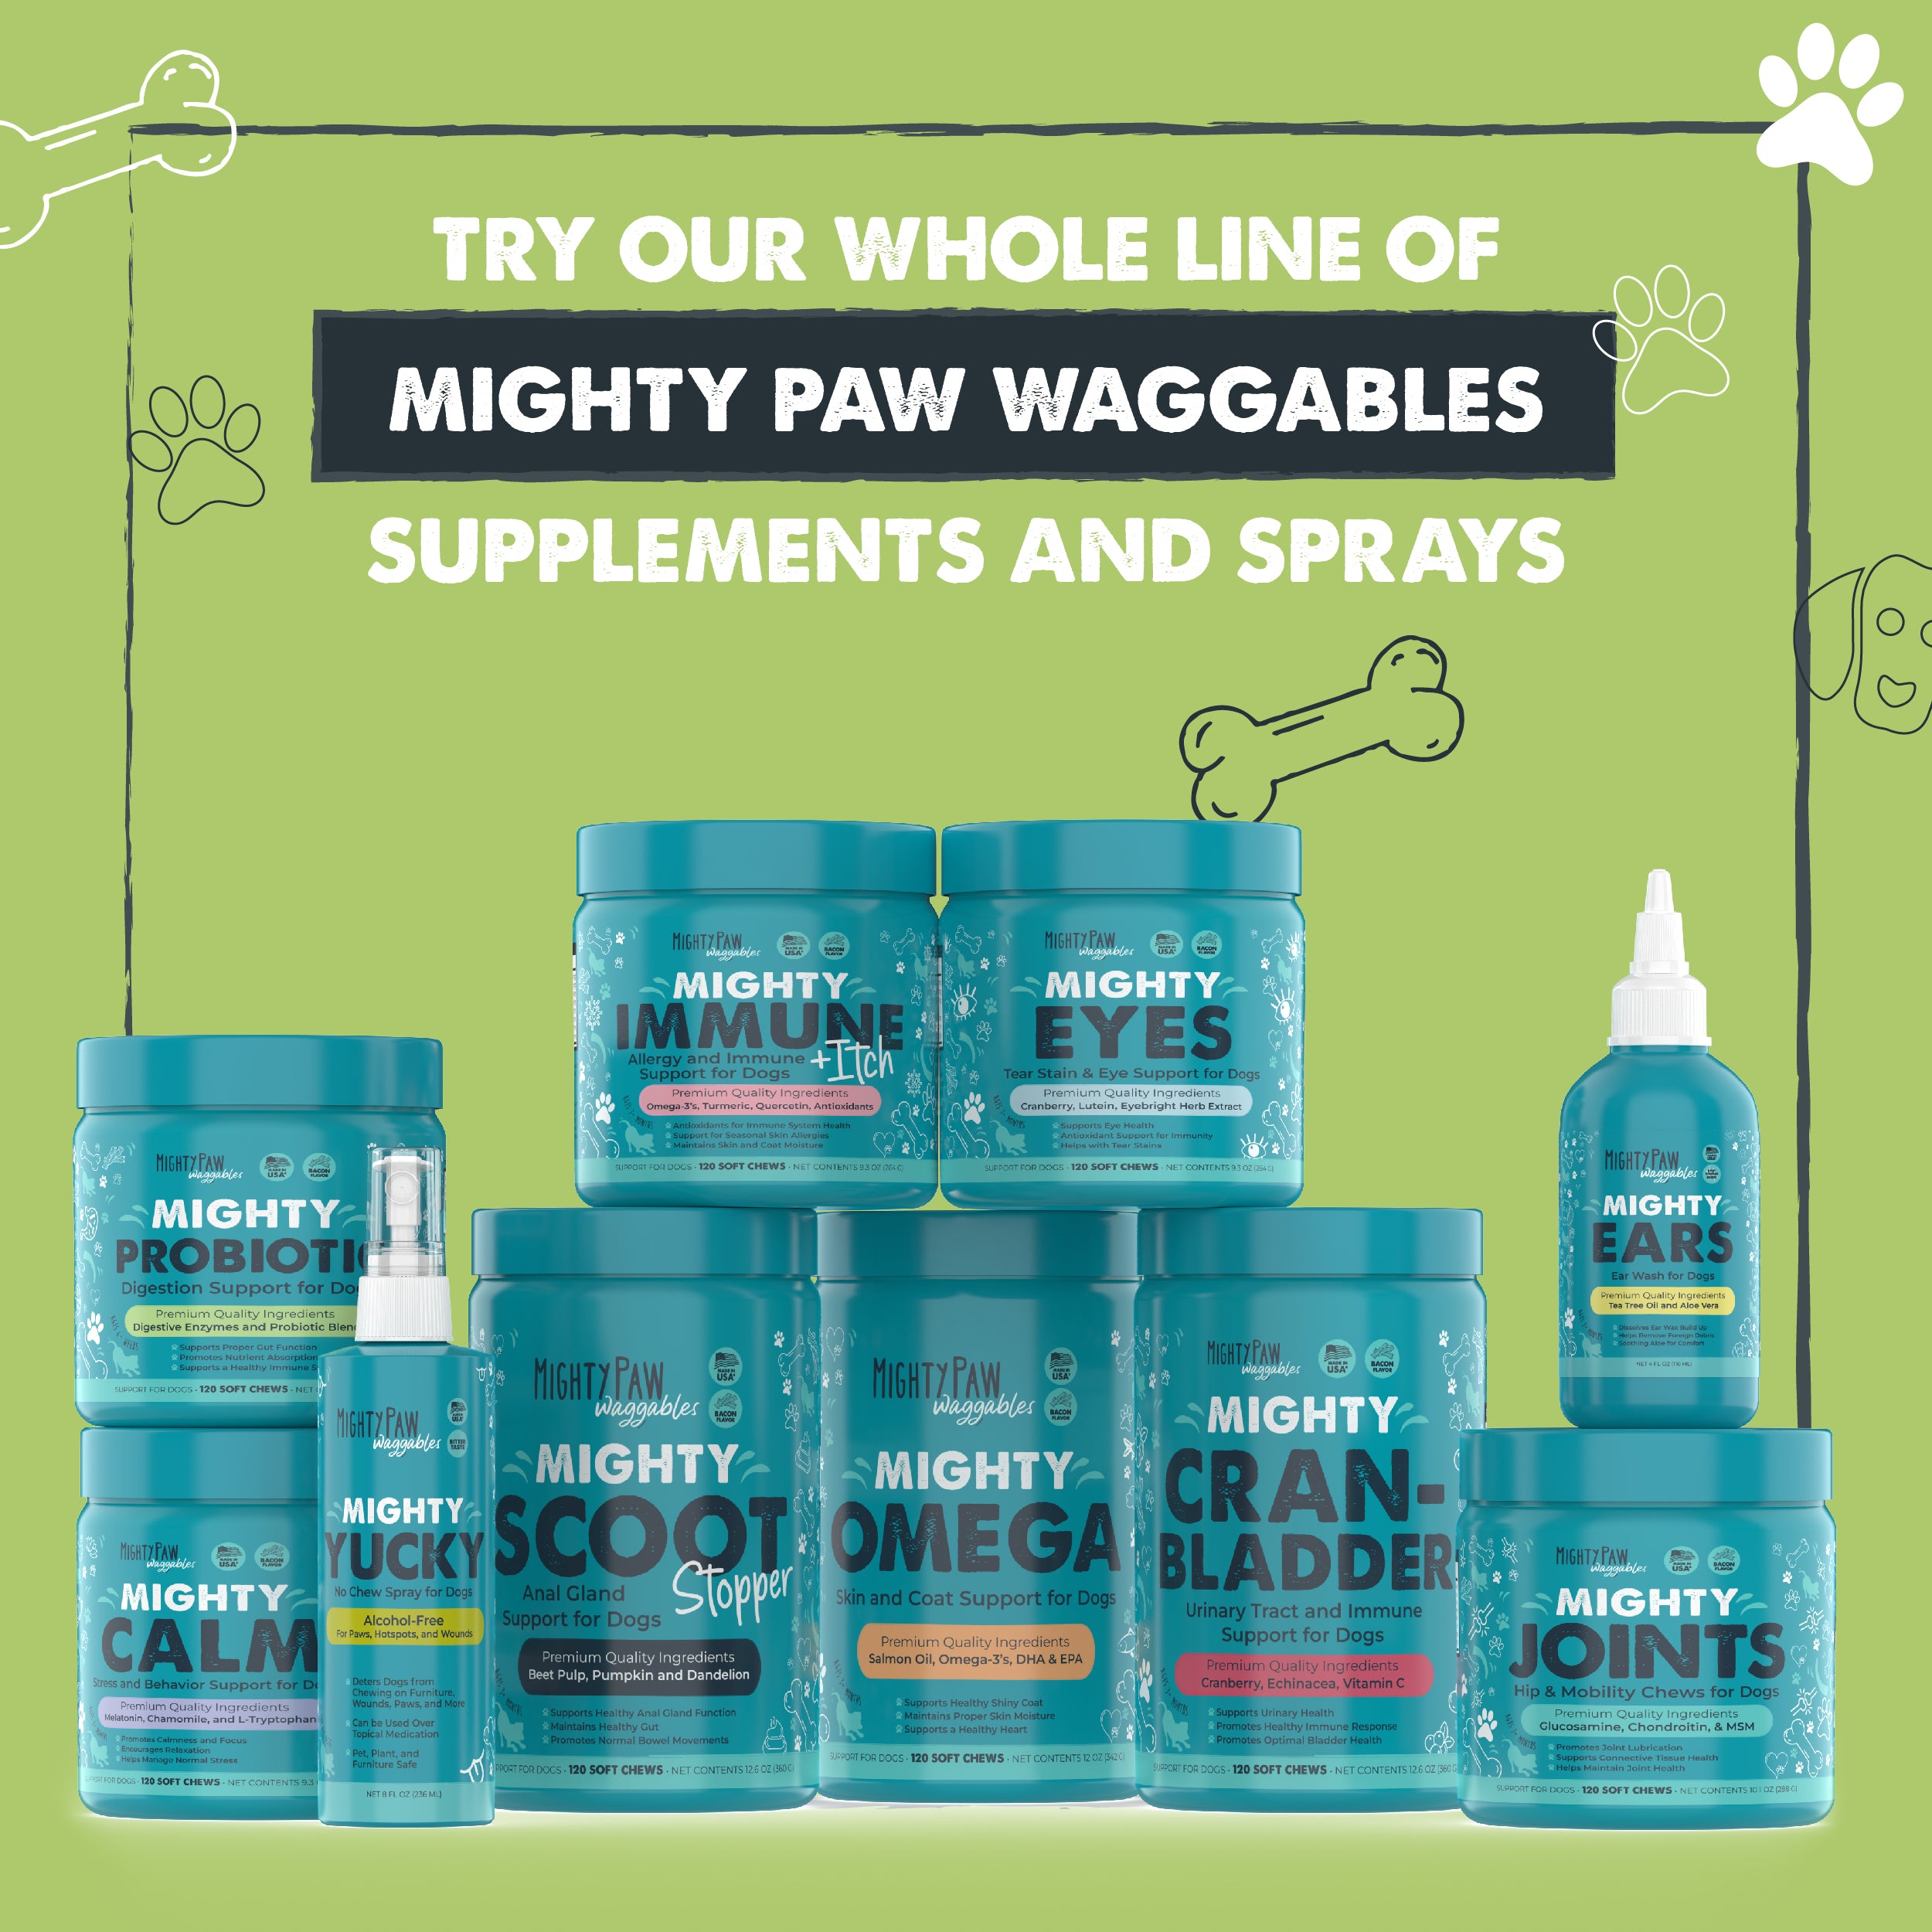 Mighty Probiotic Chews for Dogs | Digestion Support